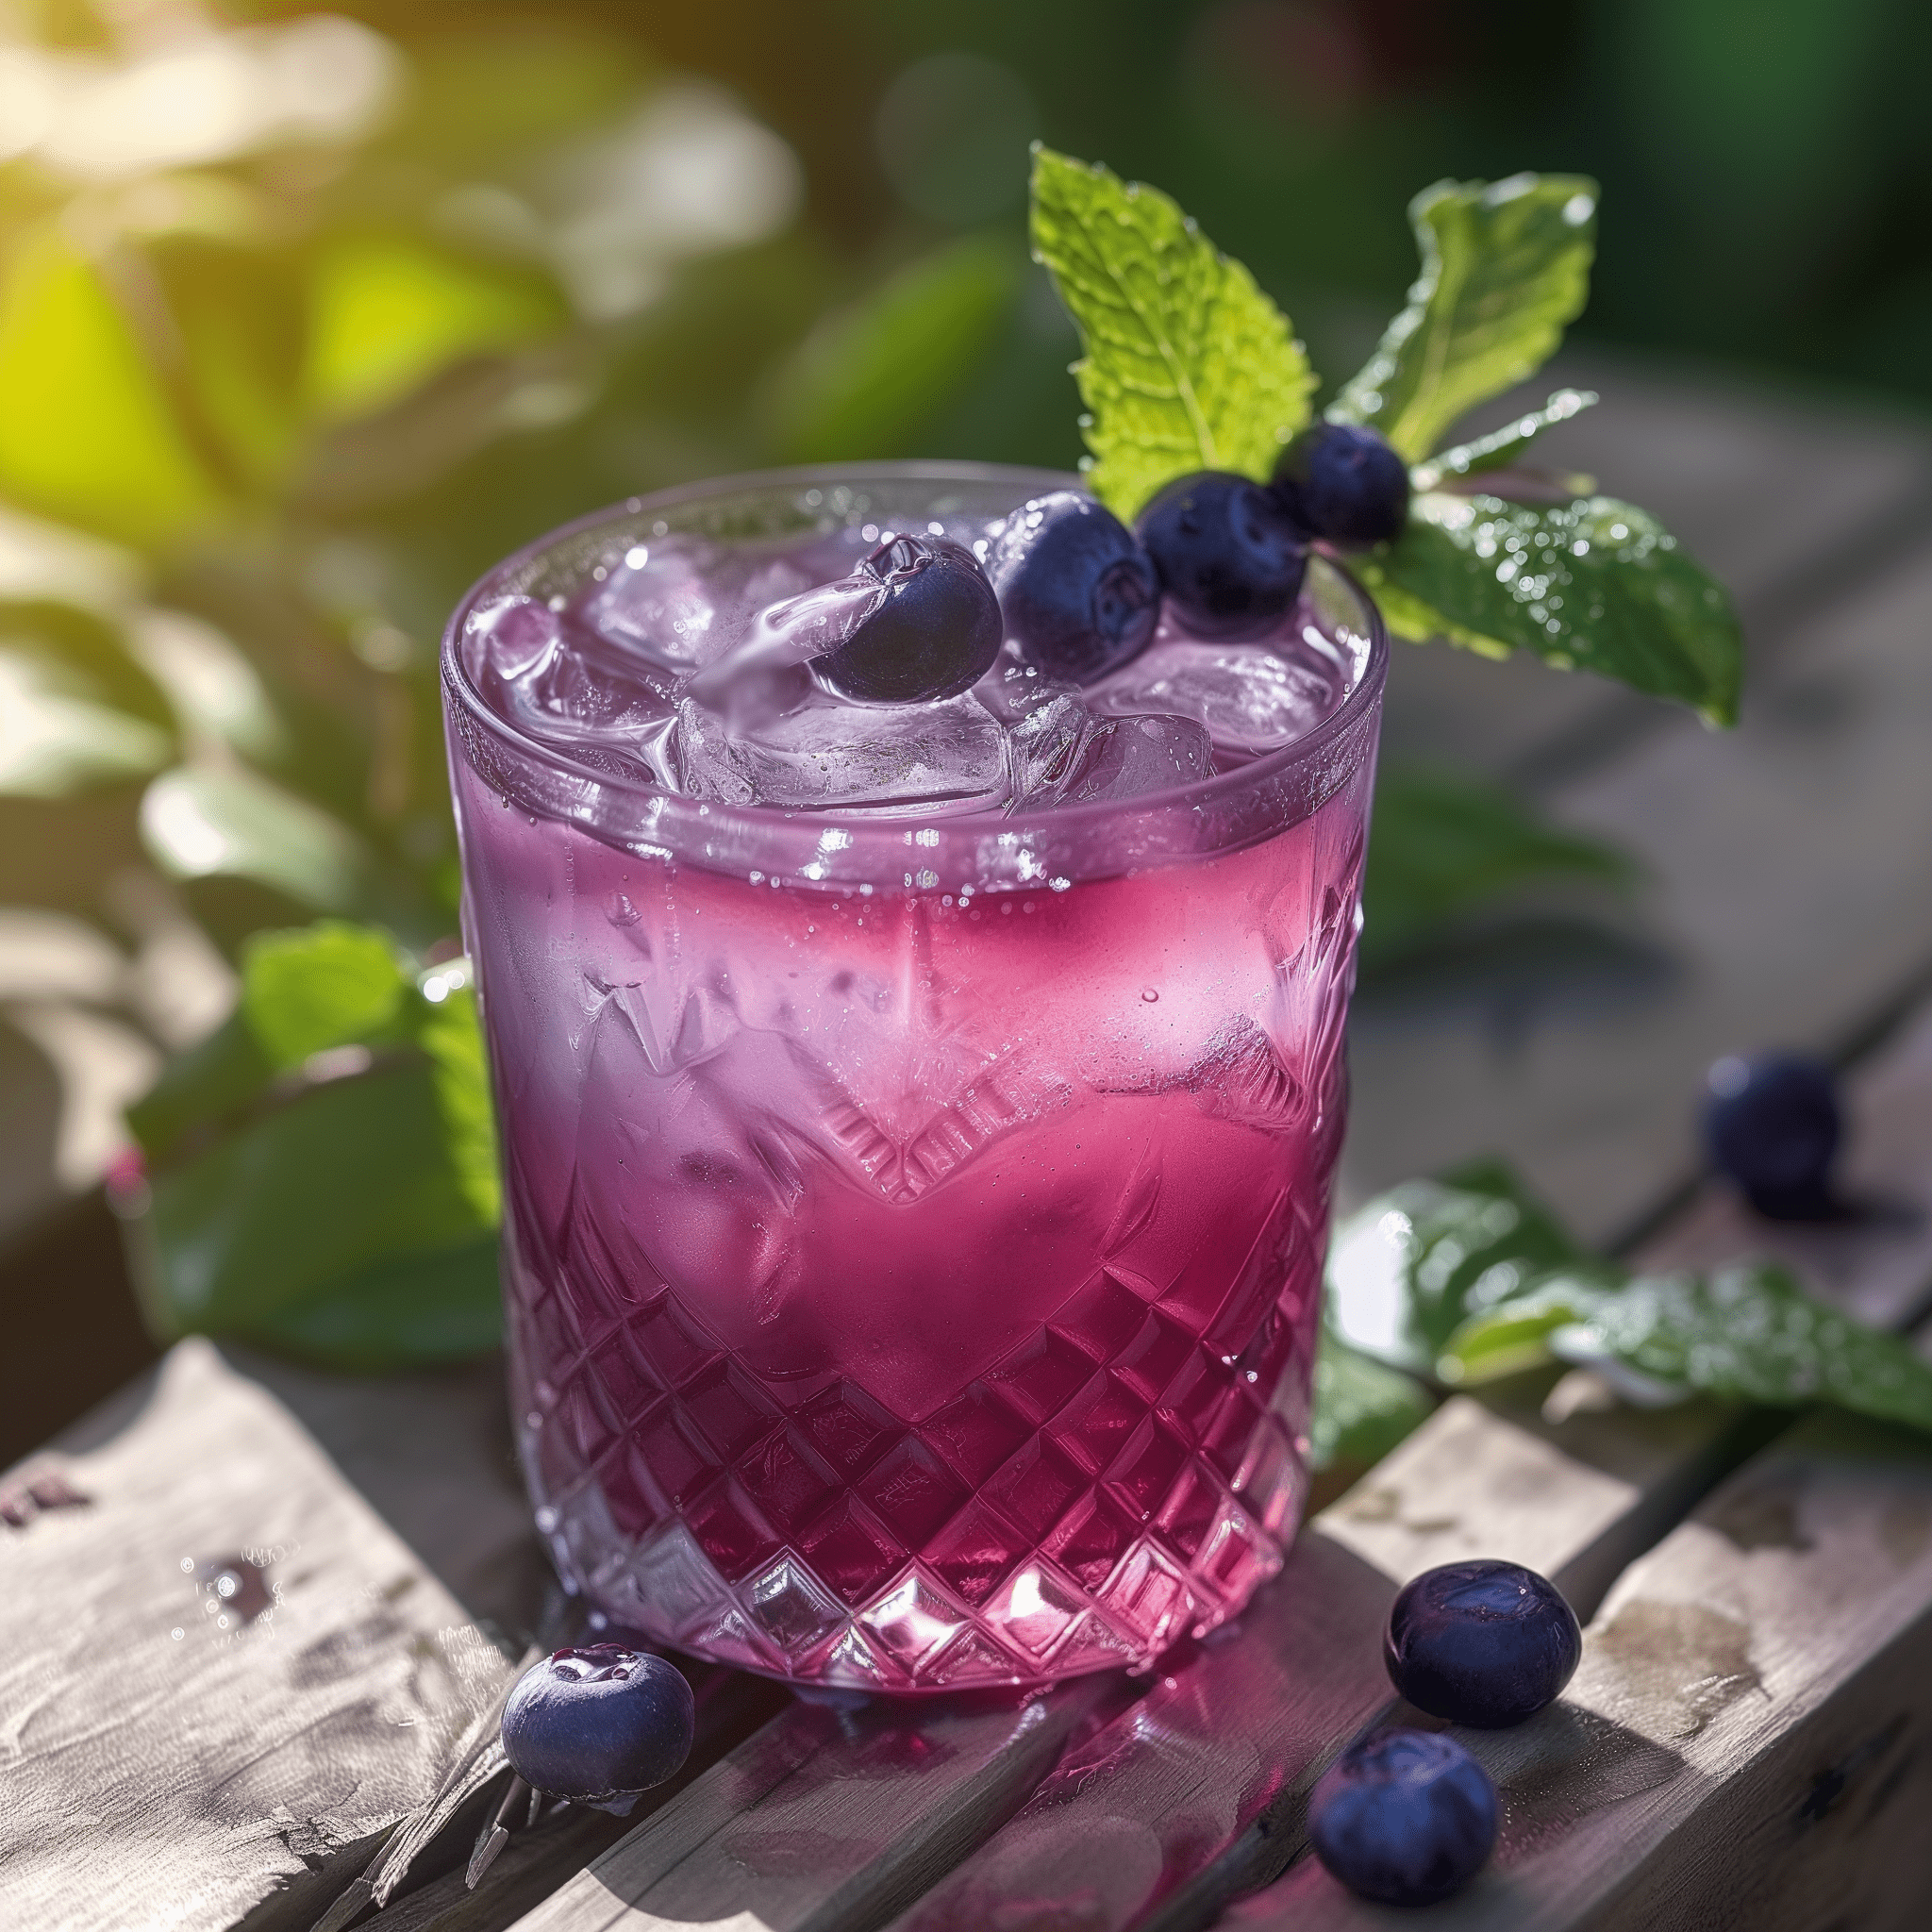 Blueberry Mint Mocktail Recipe - The Blueberry Mint Mocktail offers a harmonious blend of sweet and tart from the blueberry syrup, complemented by the spicy effervescence of ginger ale. The fresh mint provides a cool, refreshing undertone that balances the sweetness, making it a delightful drink to savor.